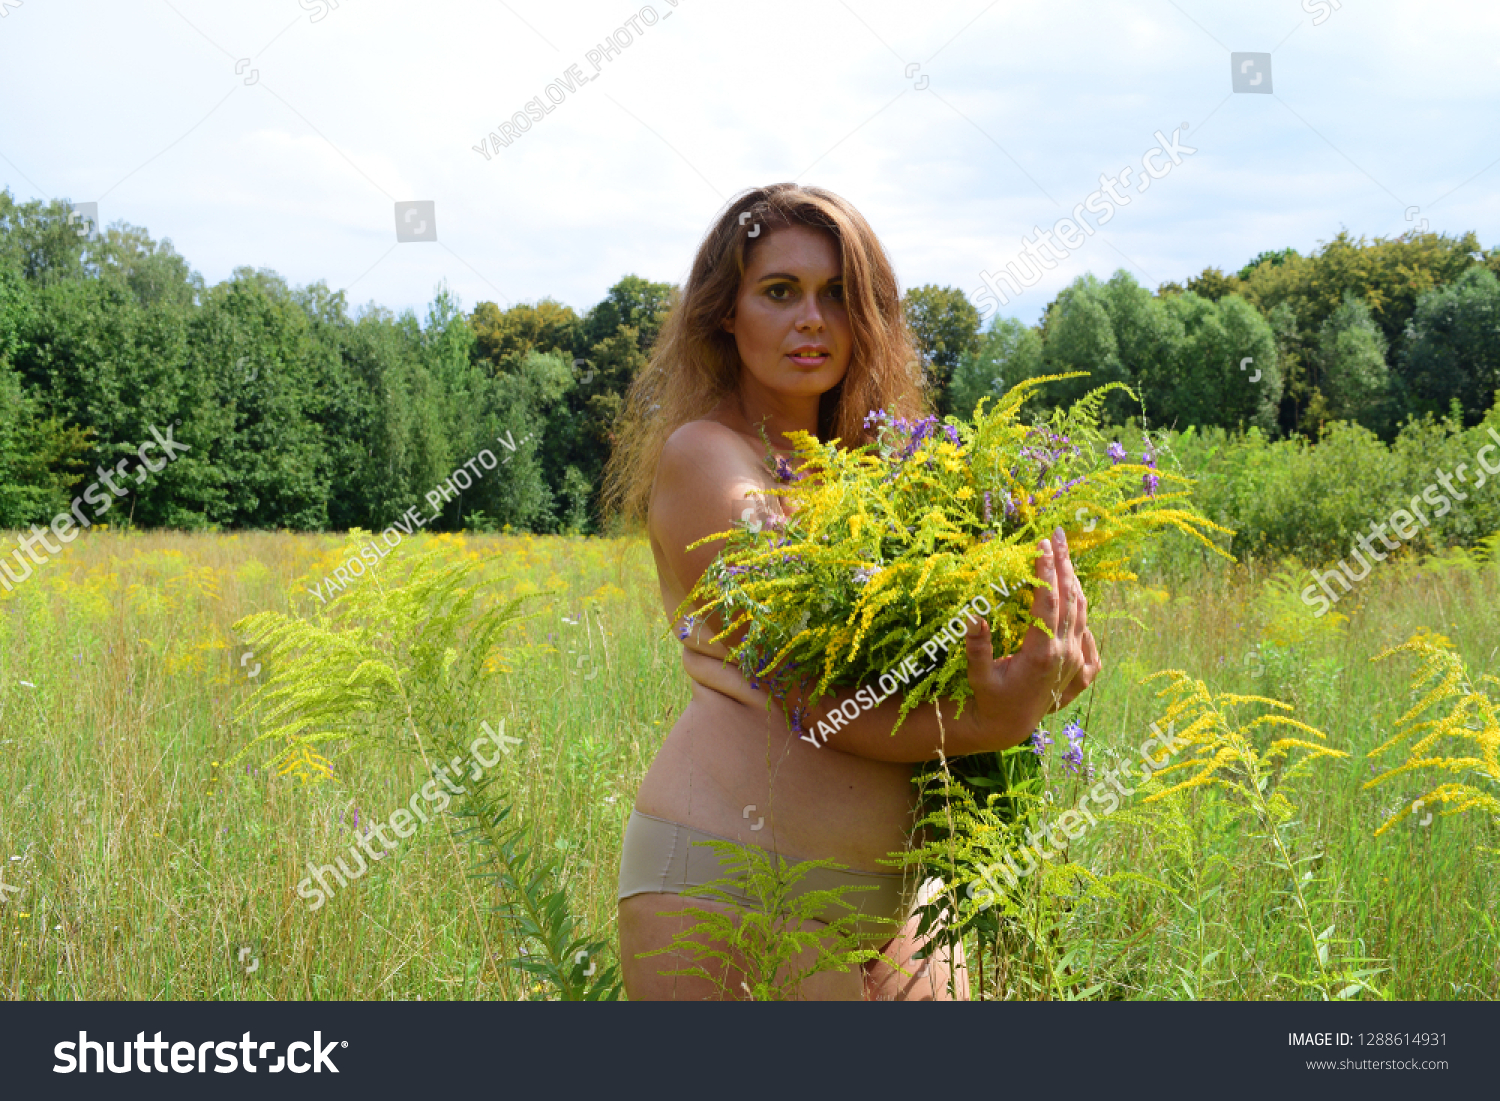 Naked Fat Woman Shorts Bouquet Flowers